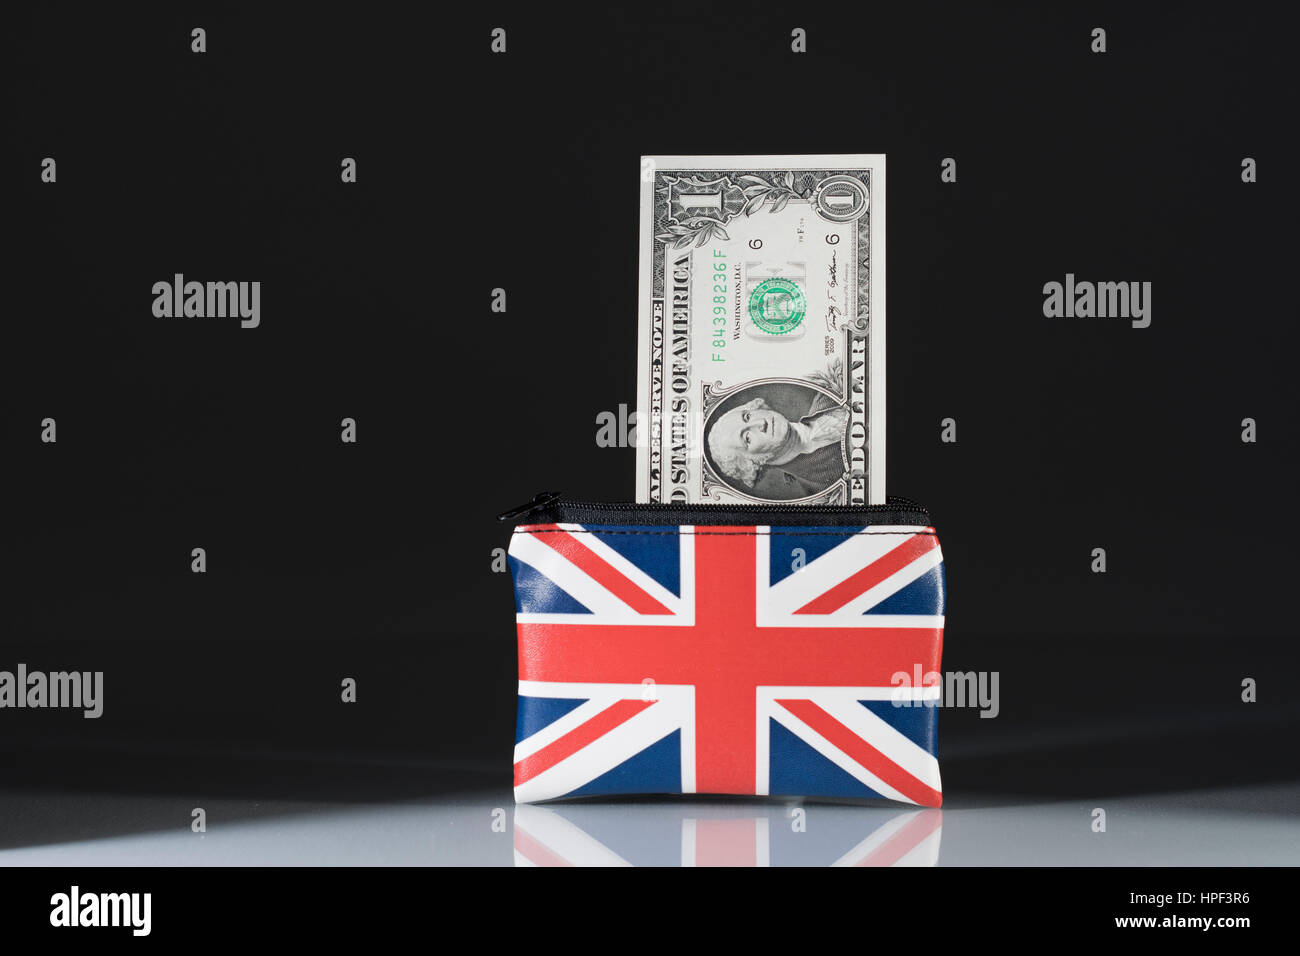 Union Jack coin purse with US Dollars set against dark background. Metaphor US Dollar-Sterling exchange rate and trade, holiday spending money in US. Stock Photo